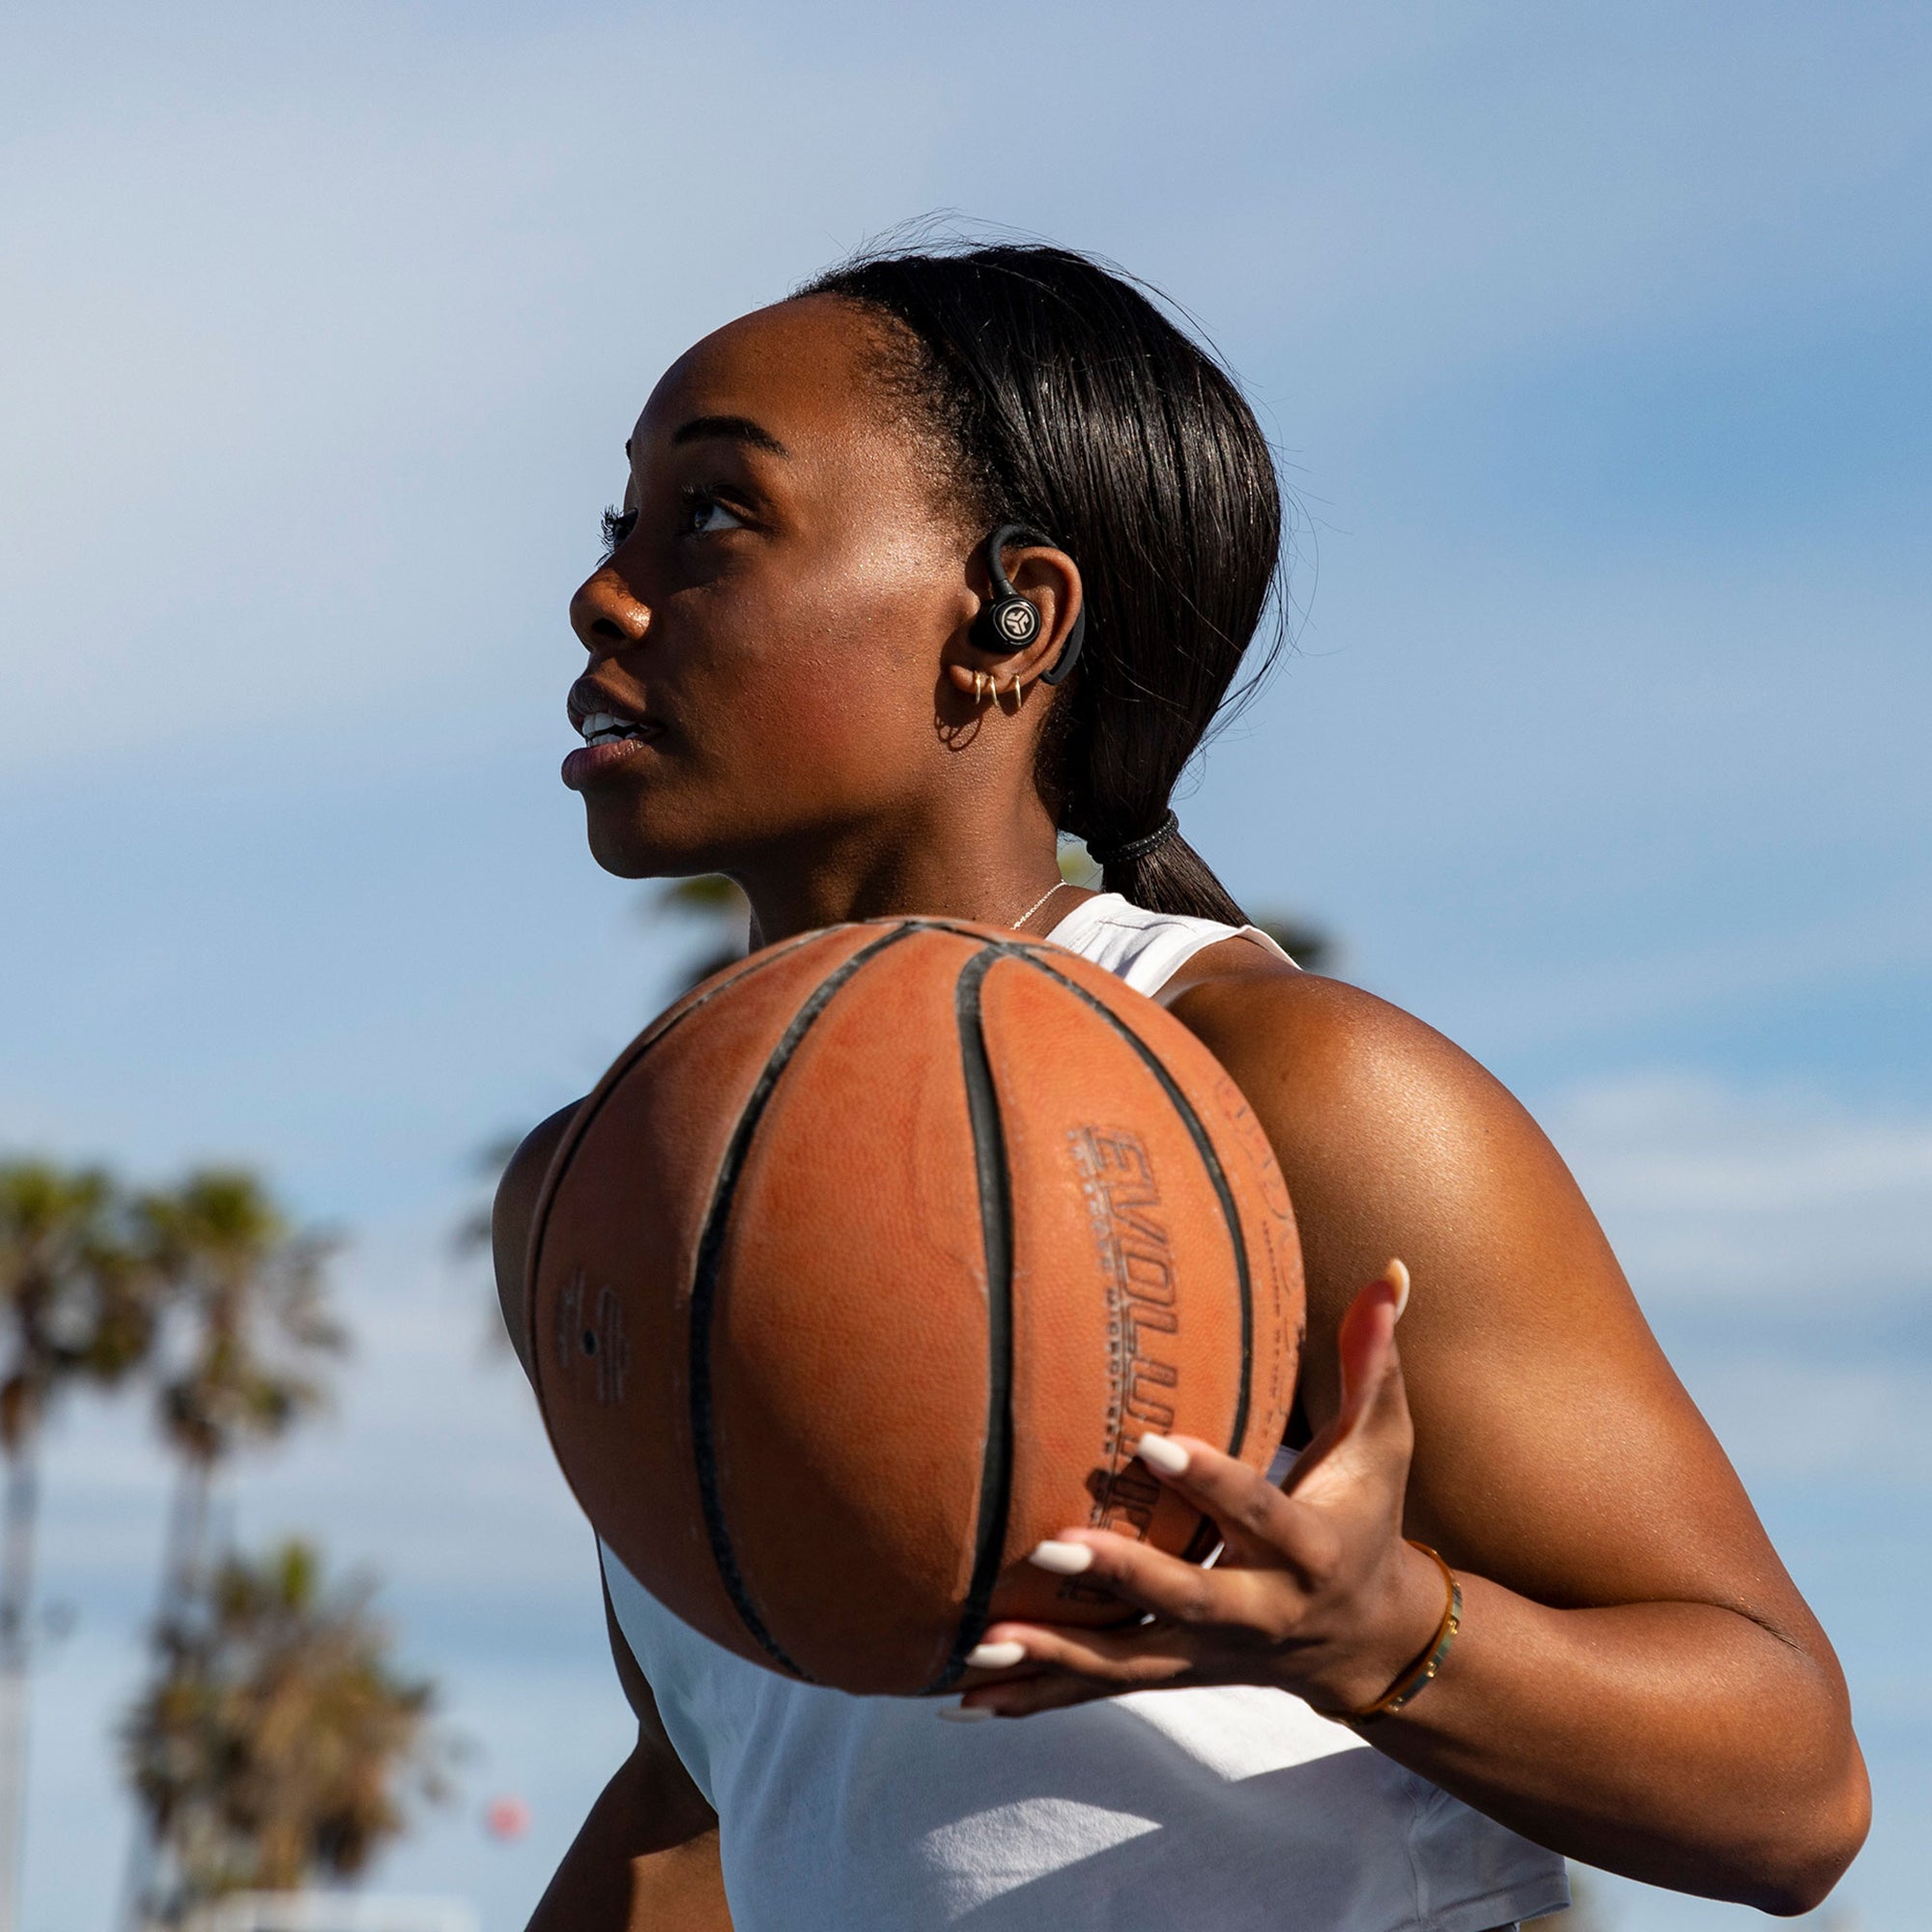 Woman Playing Basketball Wearing Epic Air Sport True Wireless Earbuds